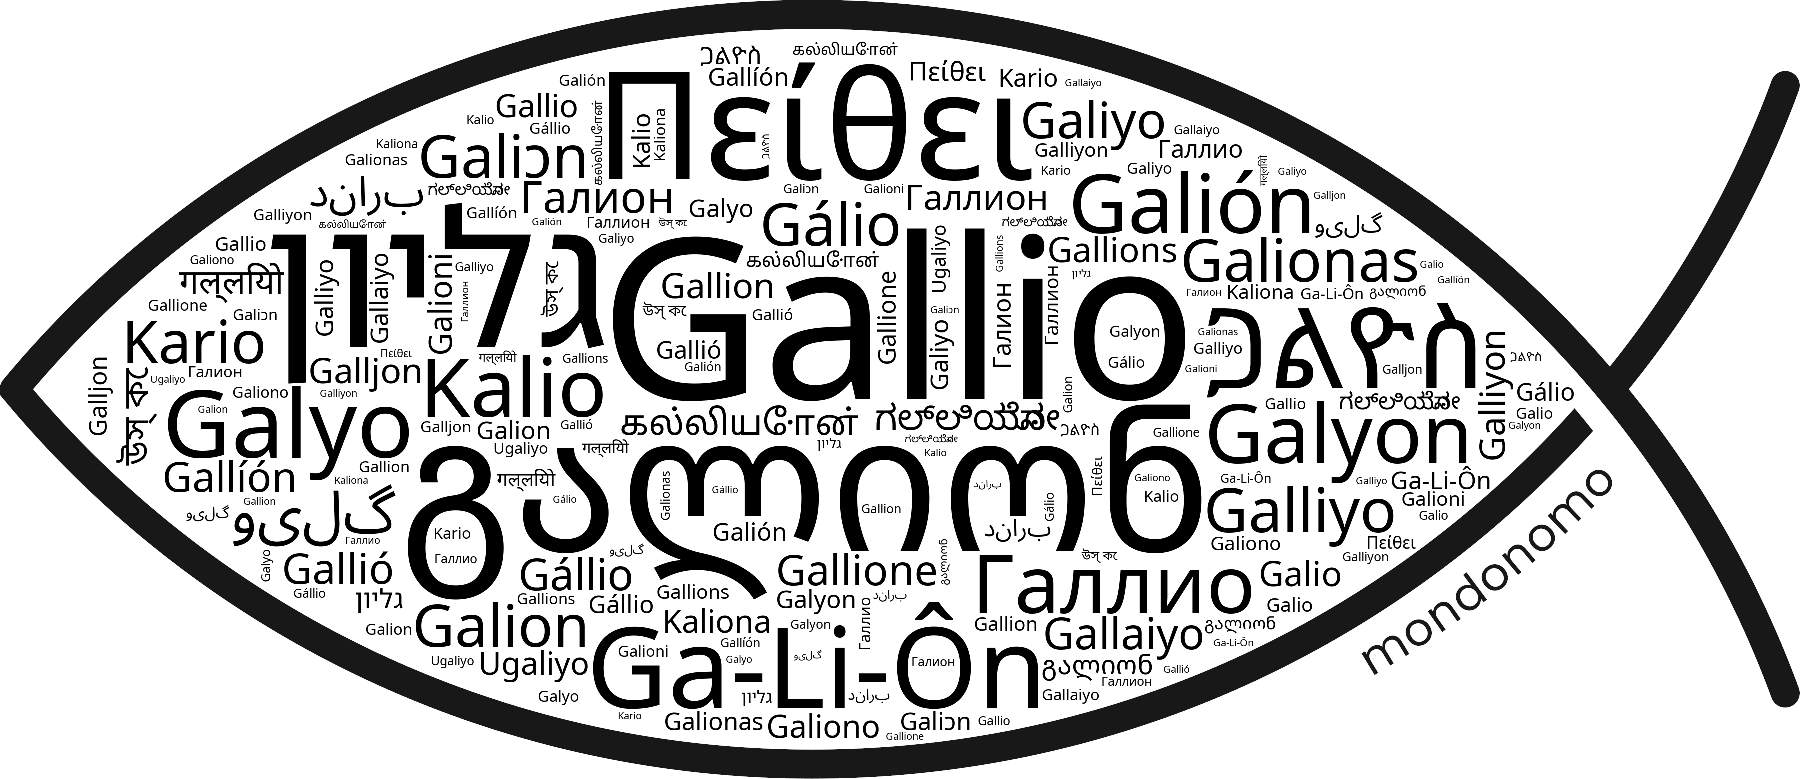 Name Gallio in the world's Bibles